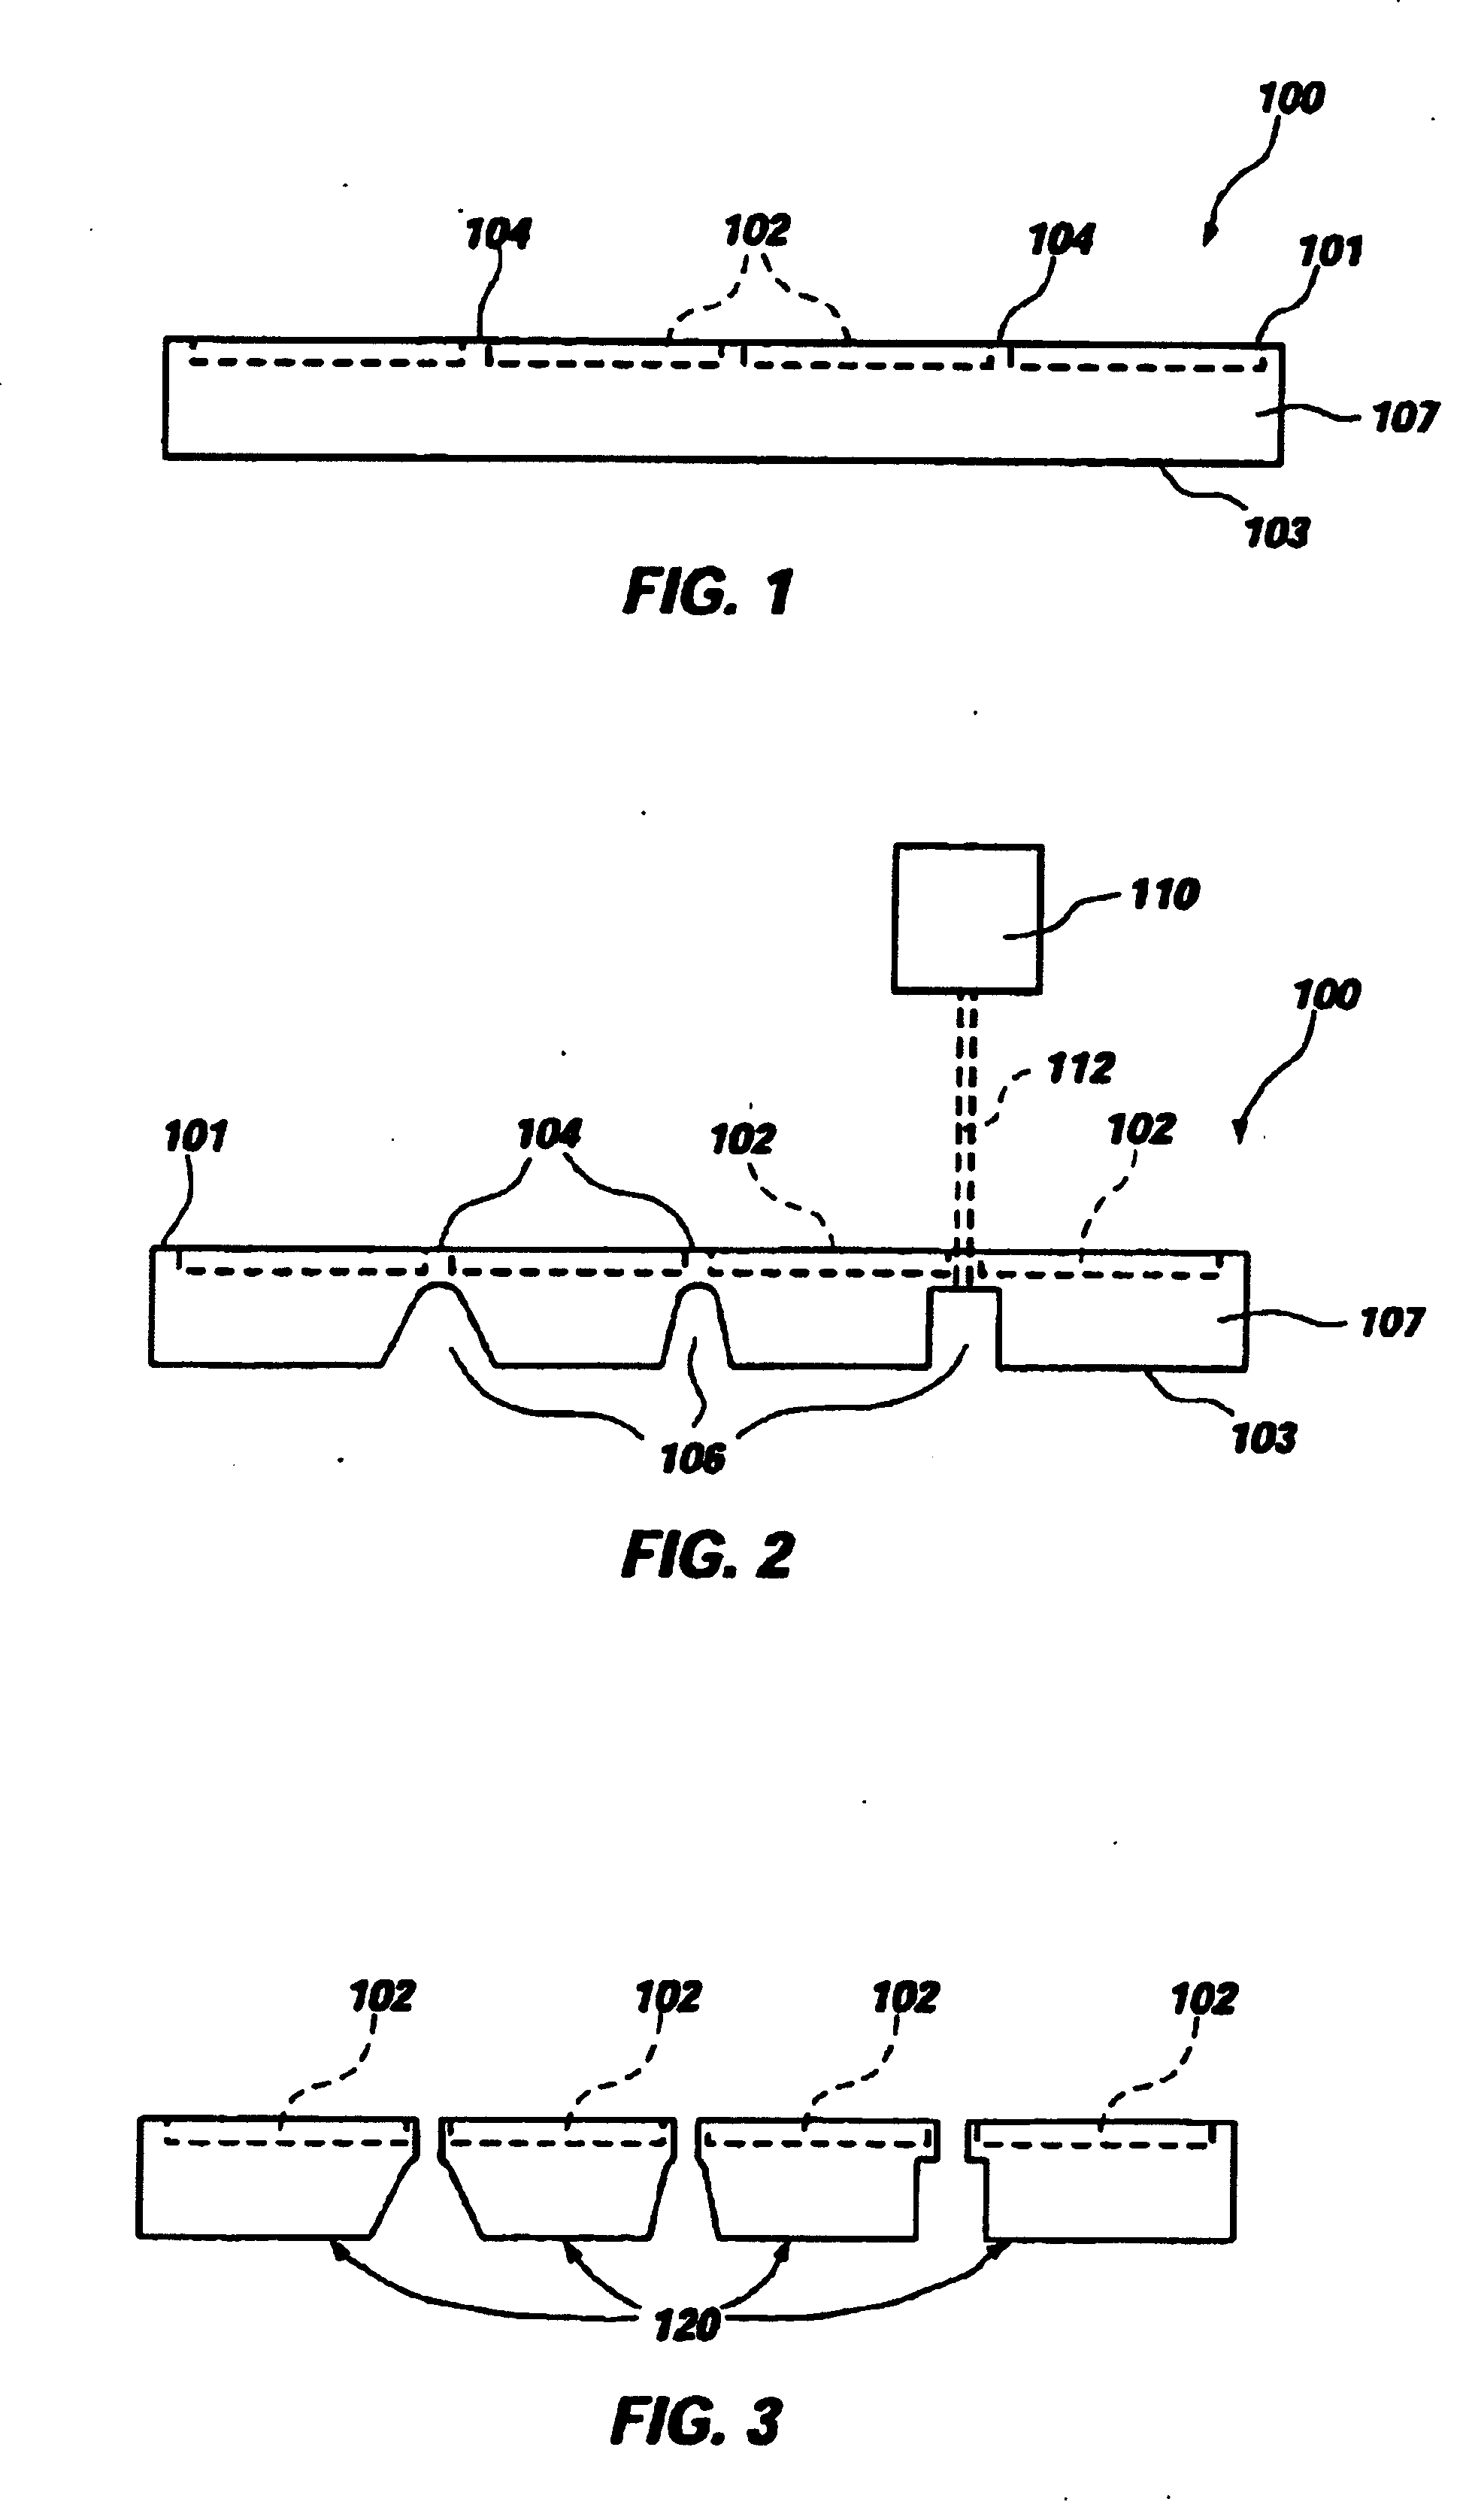 Methods and apparatus relating to singulating semiconductor wafers and wafer scale assemblies